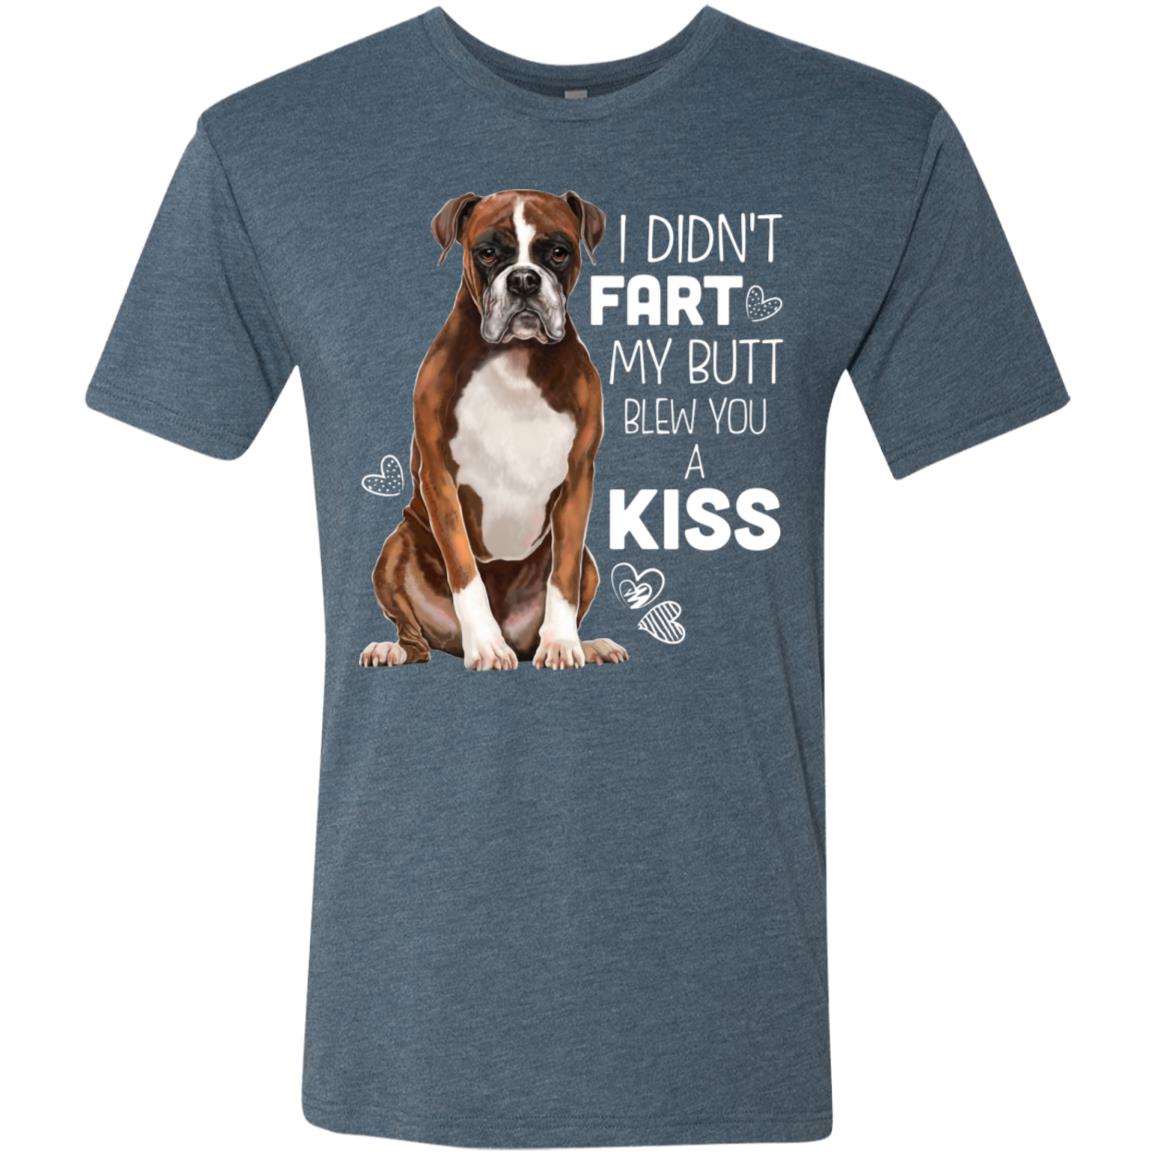 Funny Short, Boxer Dog Tshirt for Men - I Didn't Fart My Butt Blew You A Kiss - GoneBold.gift